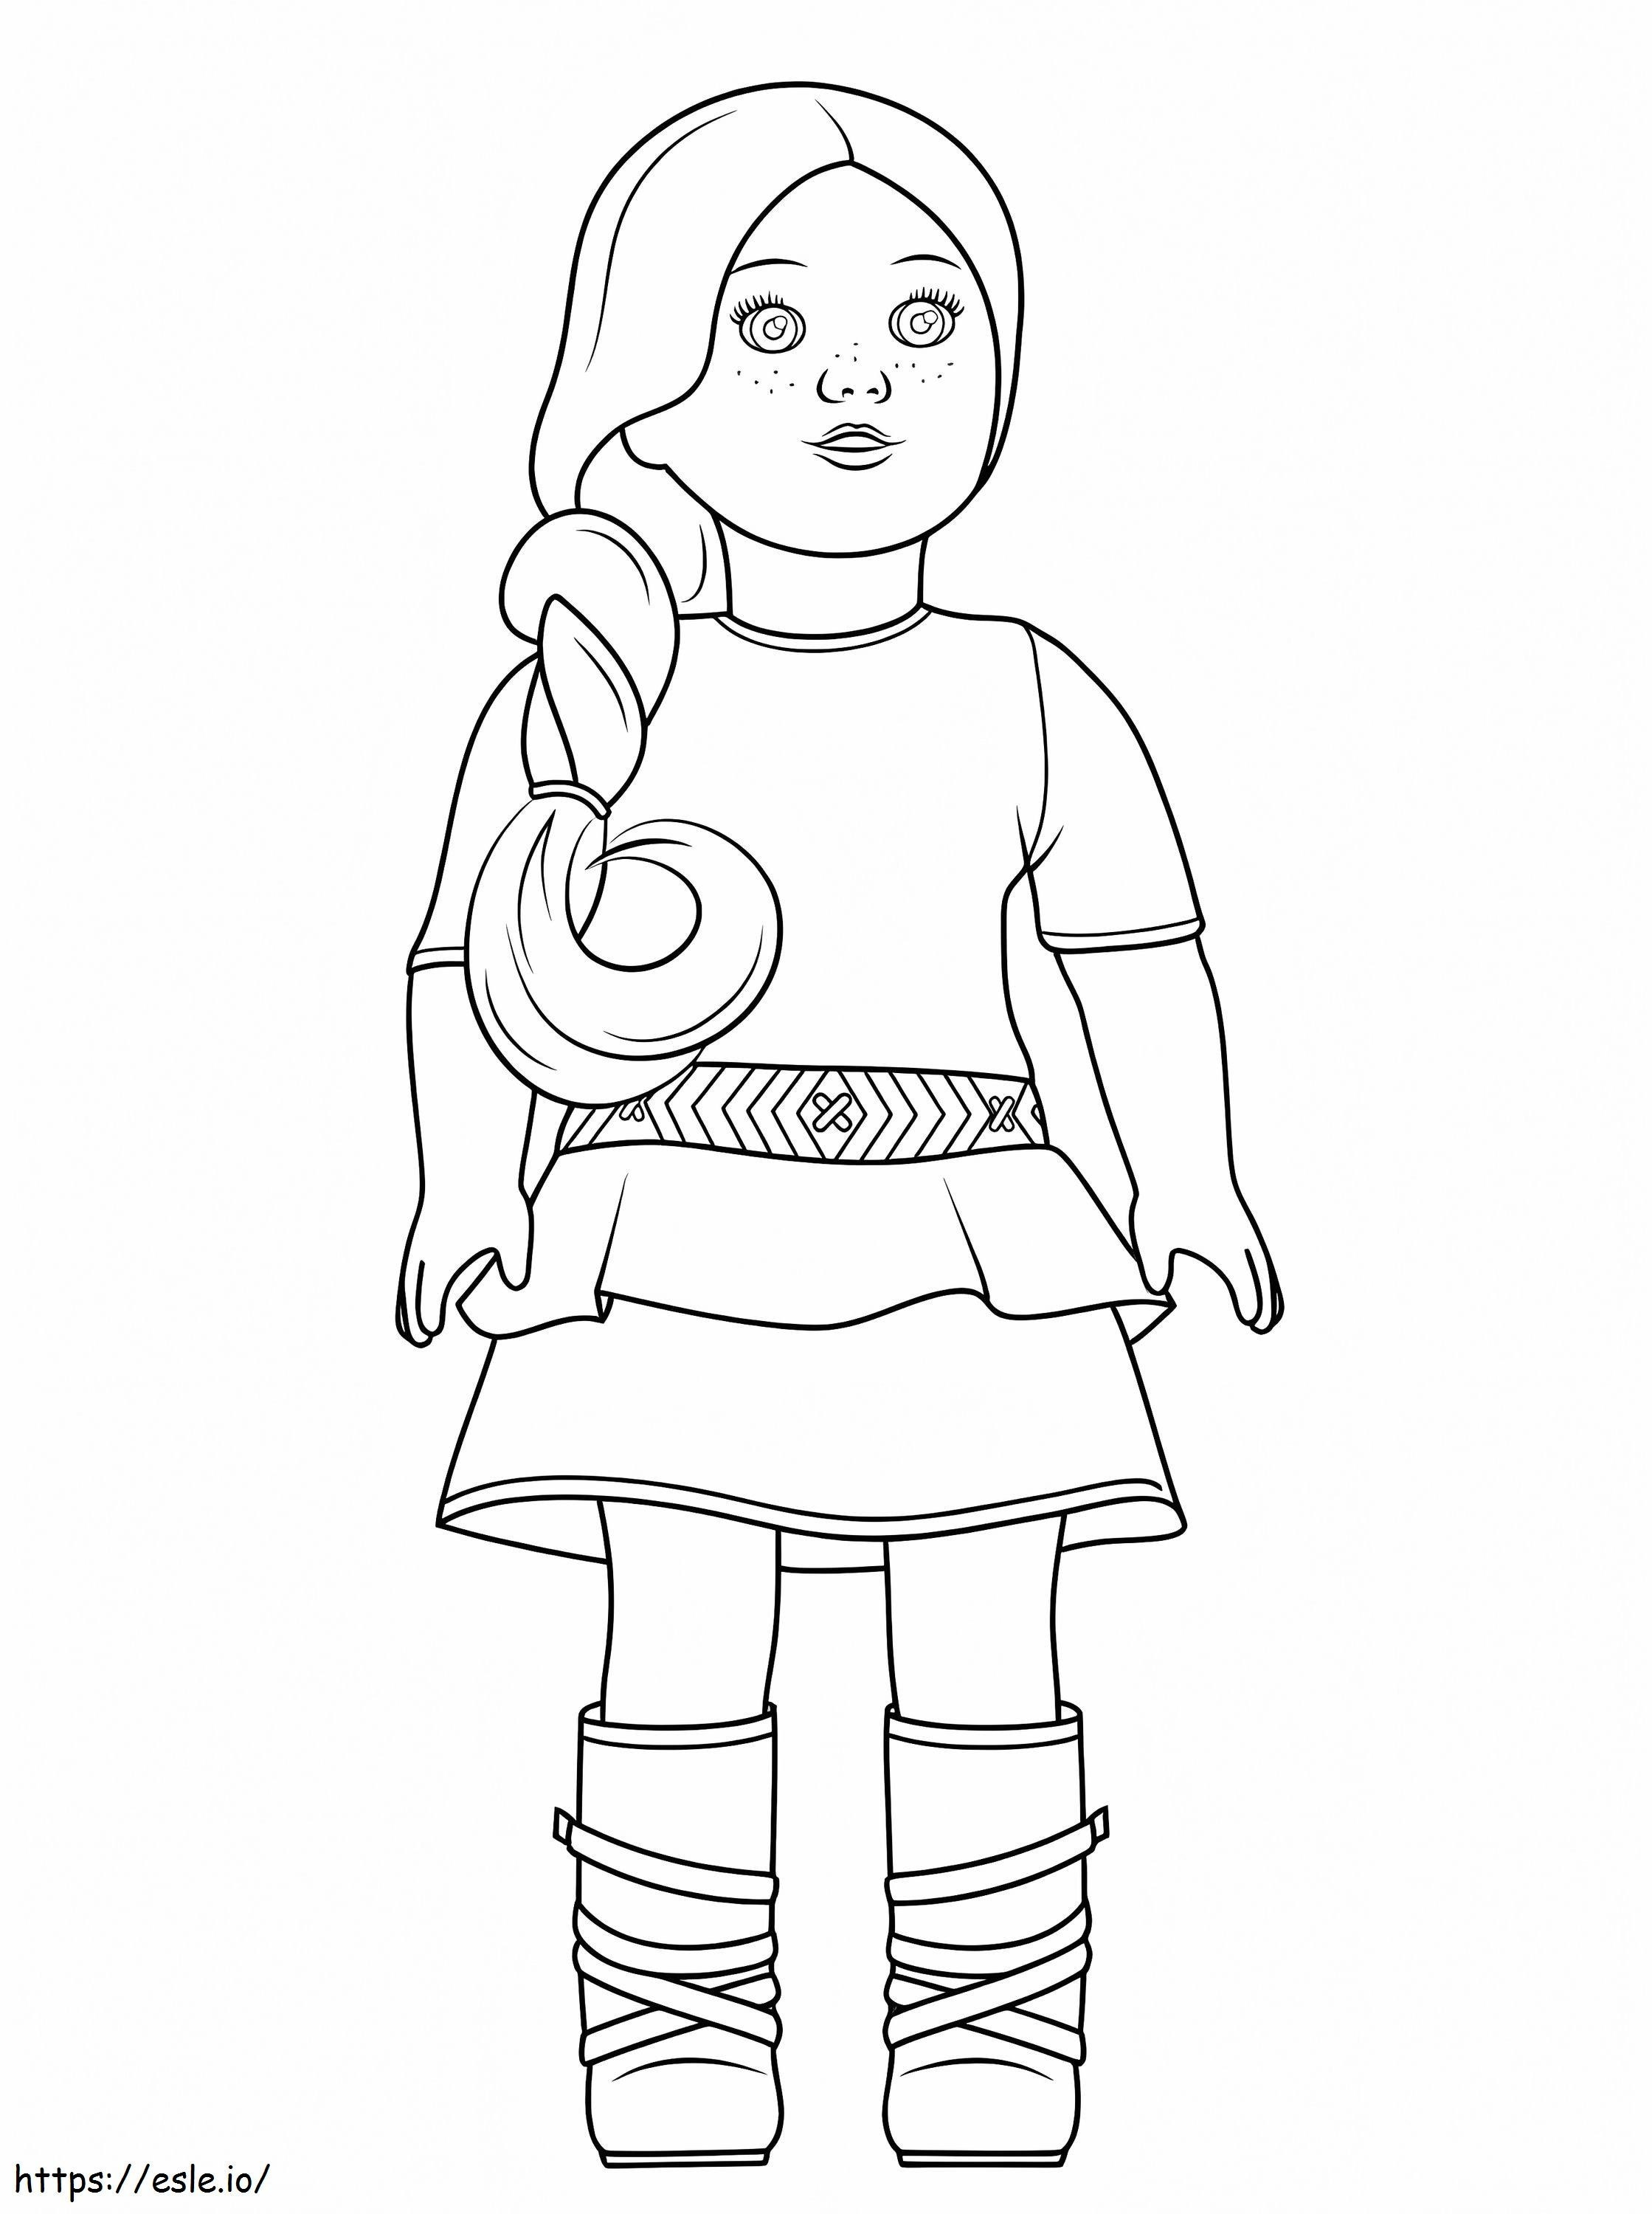 American Girl Saige coloring page